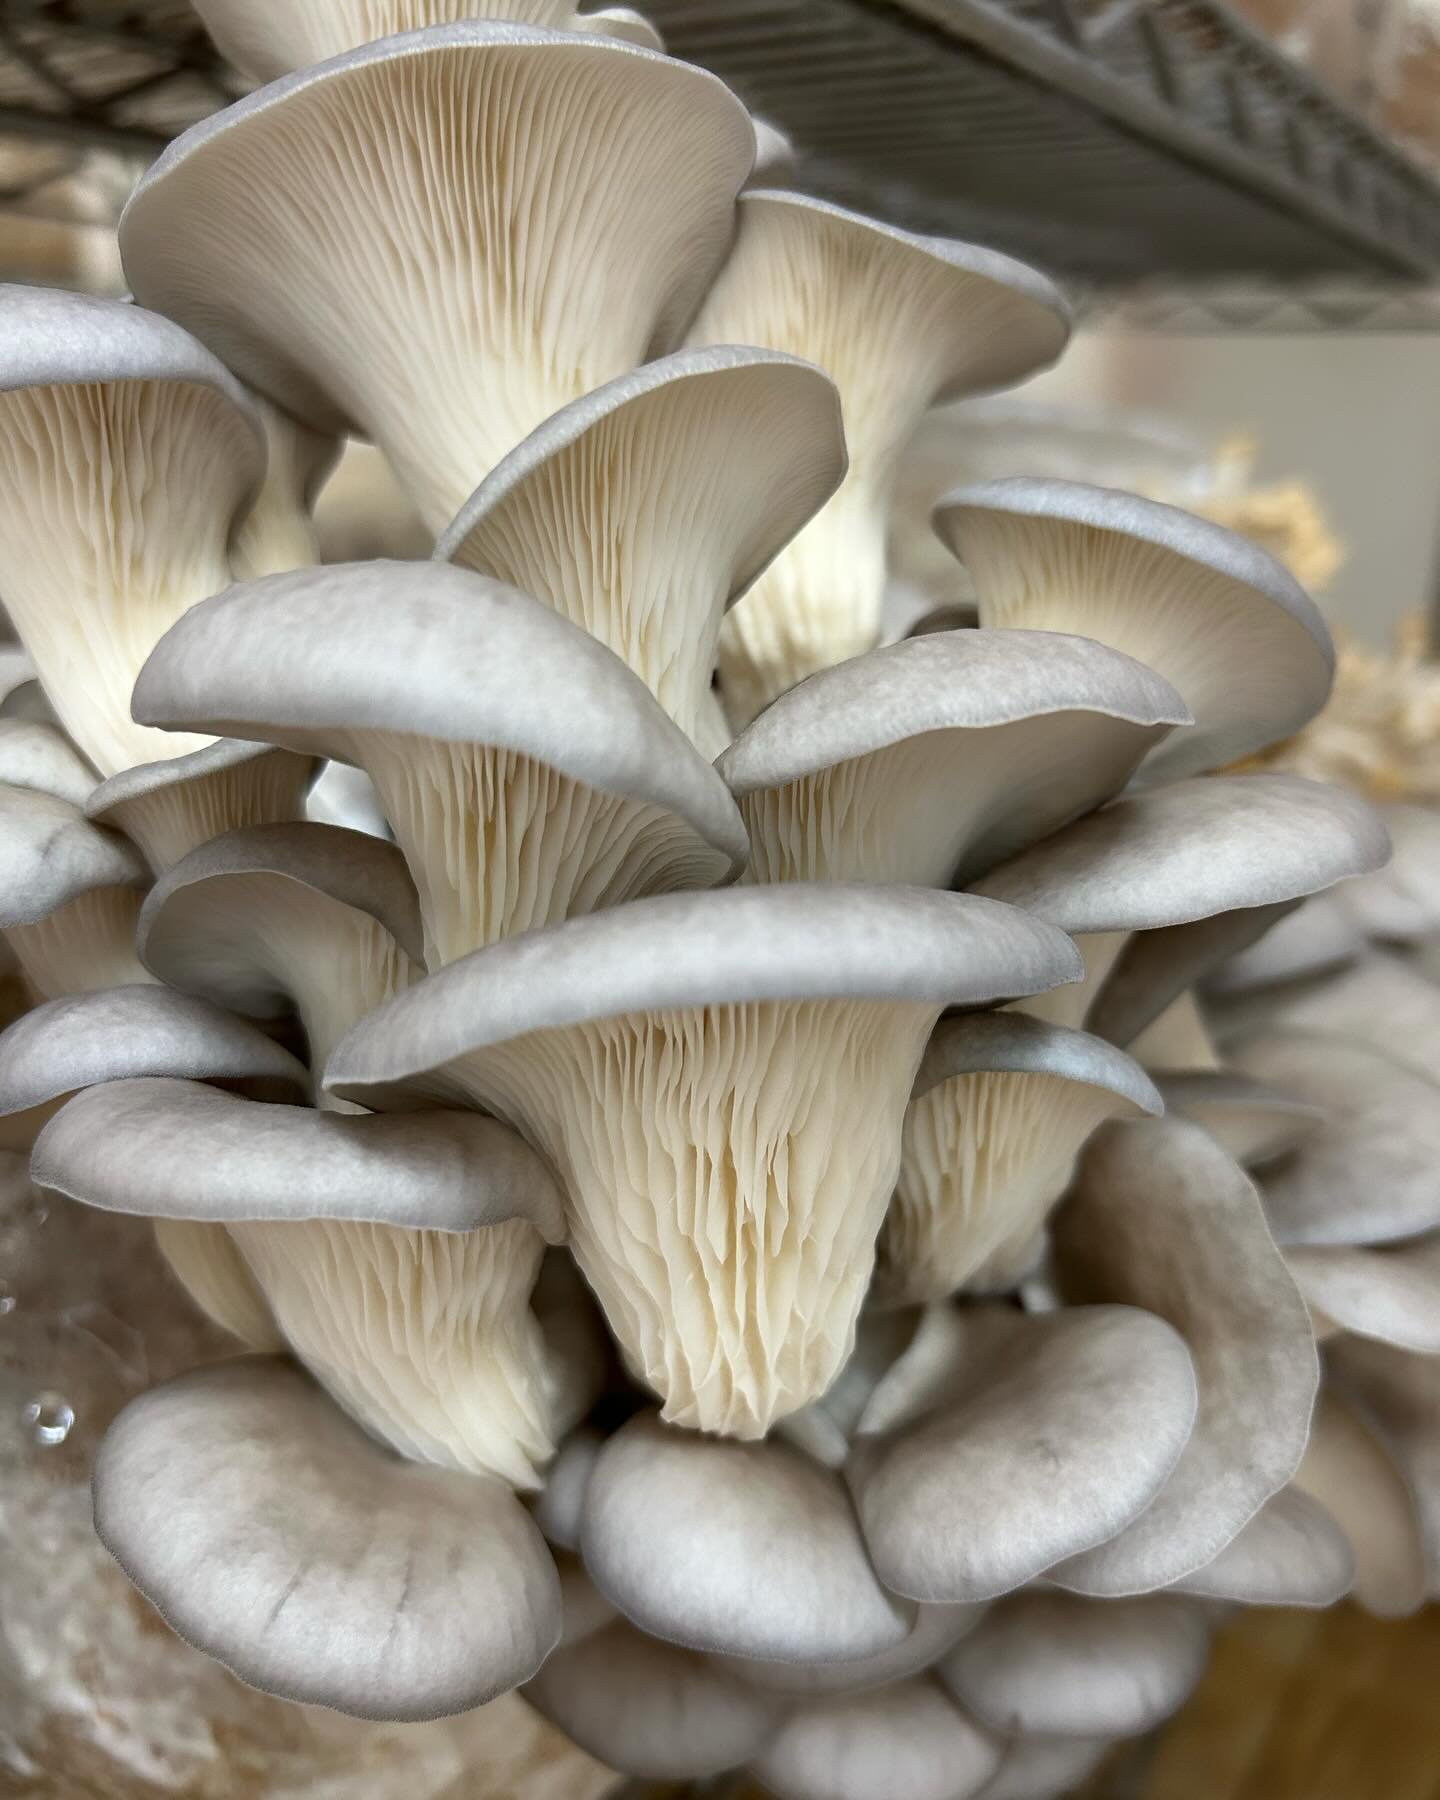 I&rsquo;m going to offer 25% discount on all Oyster Mushroom sales tomorrow at the Monday Market at Organic Oasis 4-7.30!!!!!
Come along and get some mushrooms and enter the raffle to win a $100 value prize. 
I&rsquo;ll have a few pounds of Lions Man